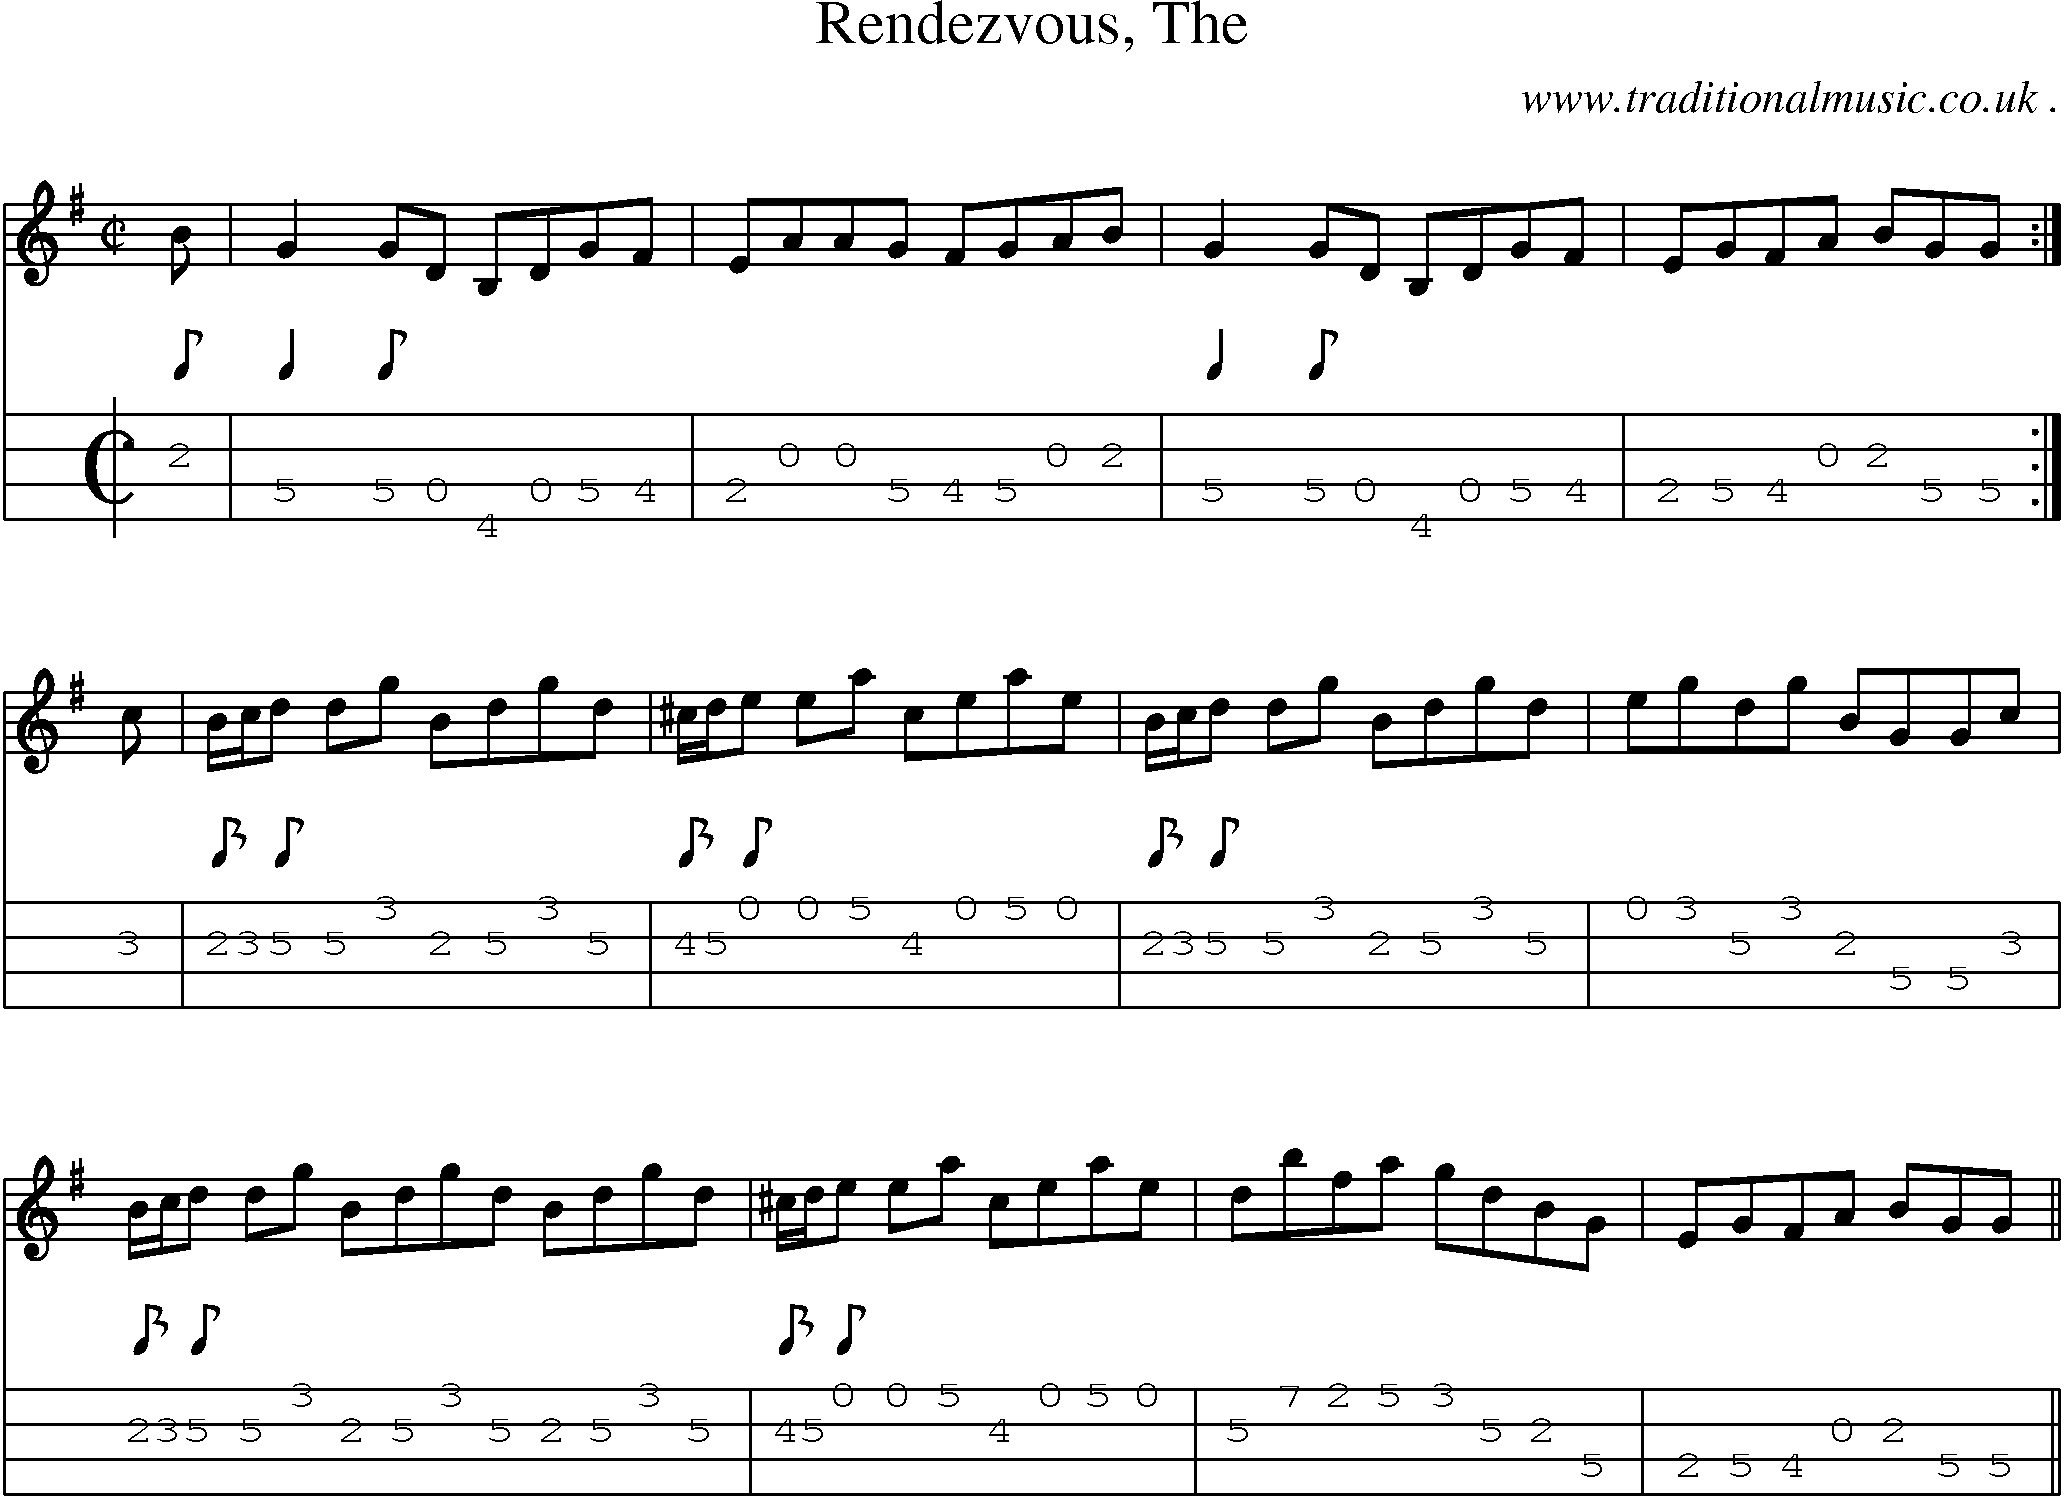 Sheet-music  score, Chords and Mandolin Tabs for Rendezvous The